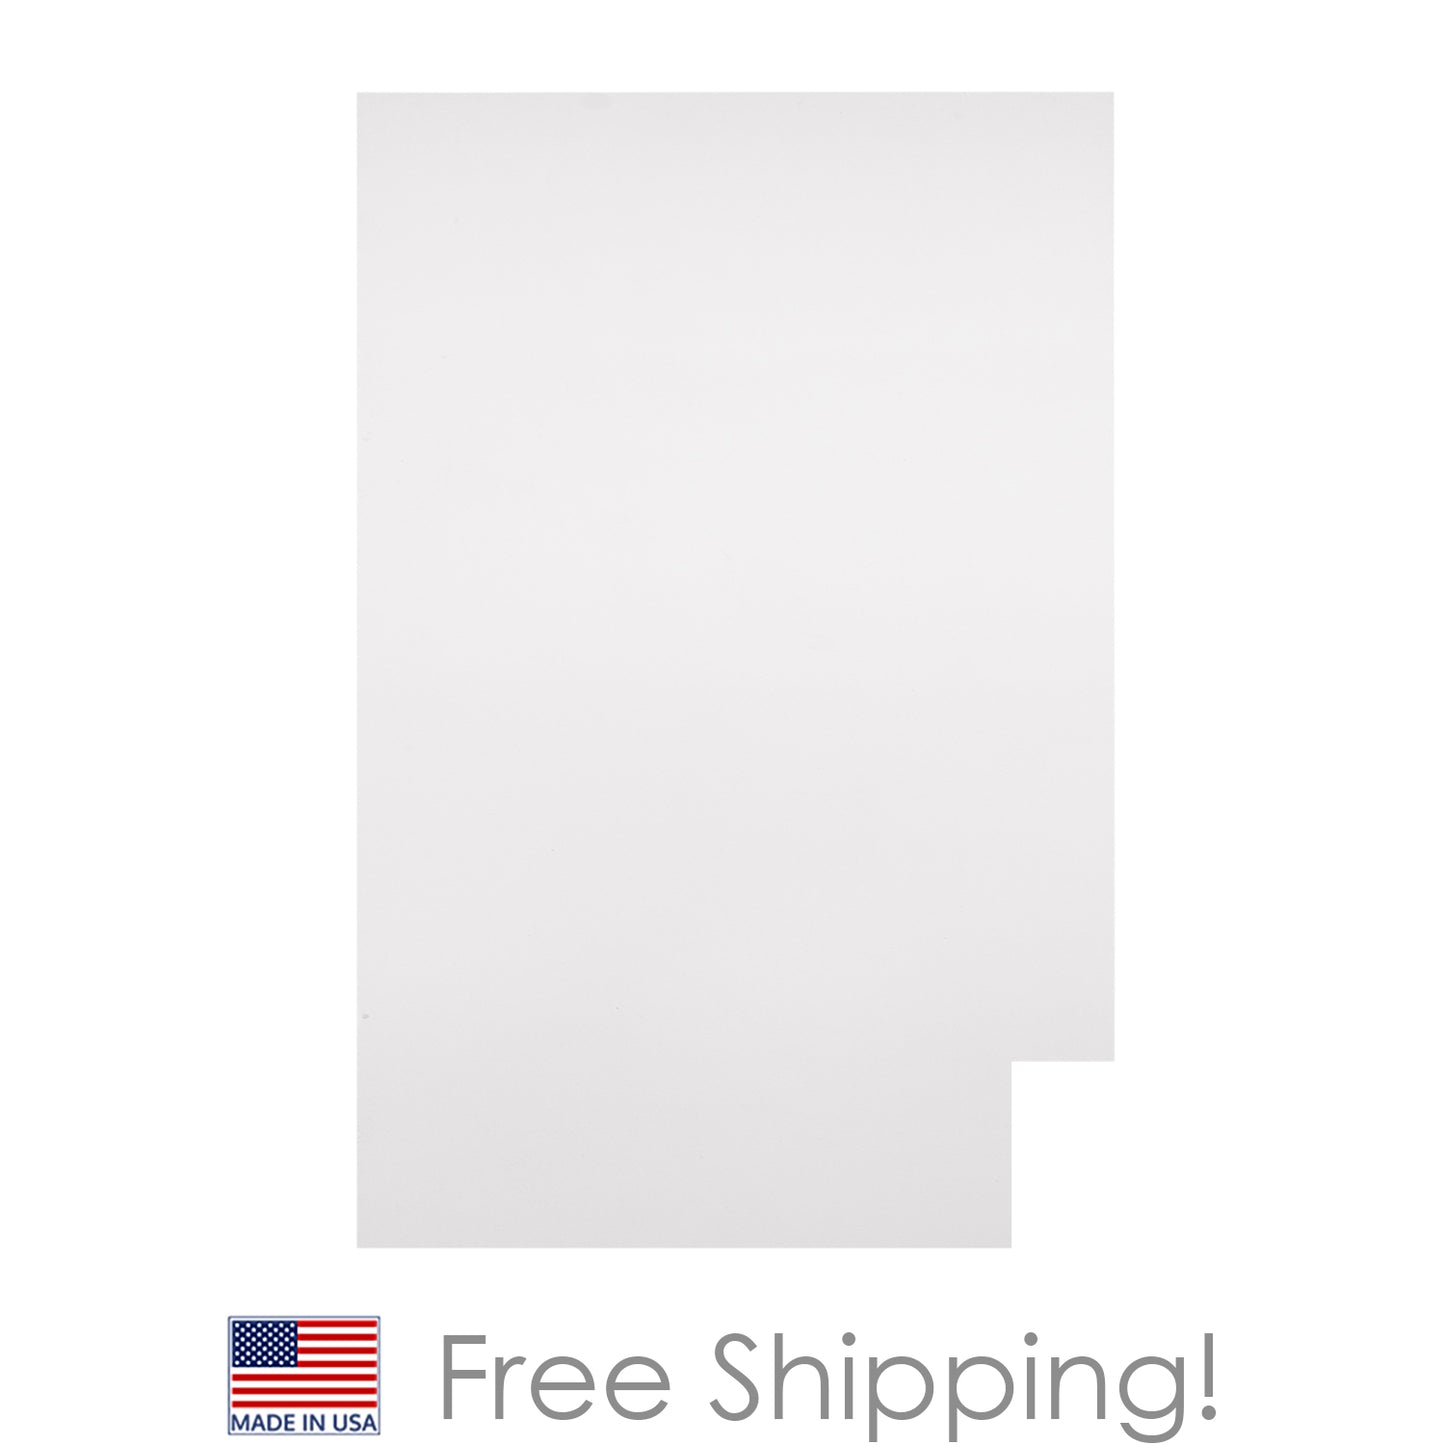 Quicklock RTA (Ready-to-Assemble) Pure White .25"X23.25"X34.5" End Panel - Left Side